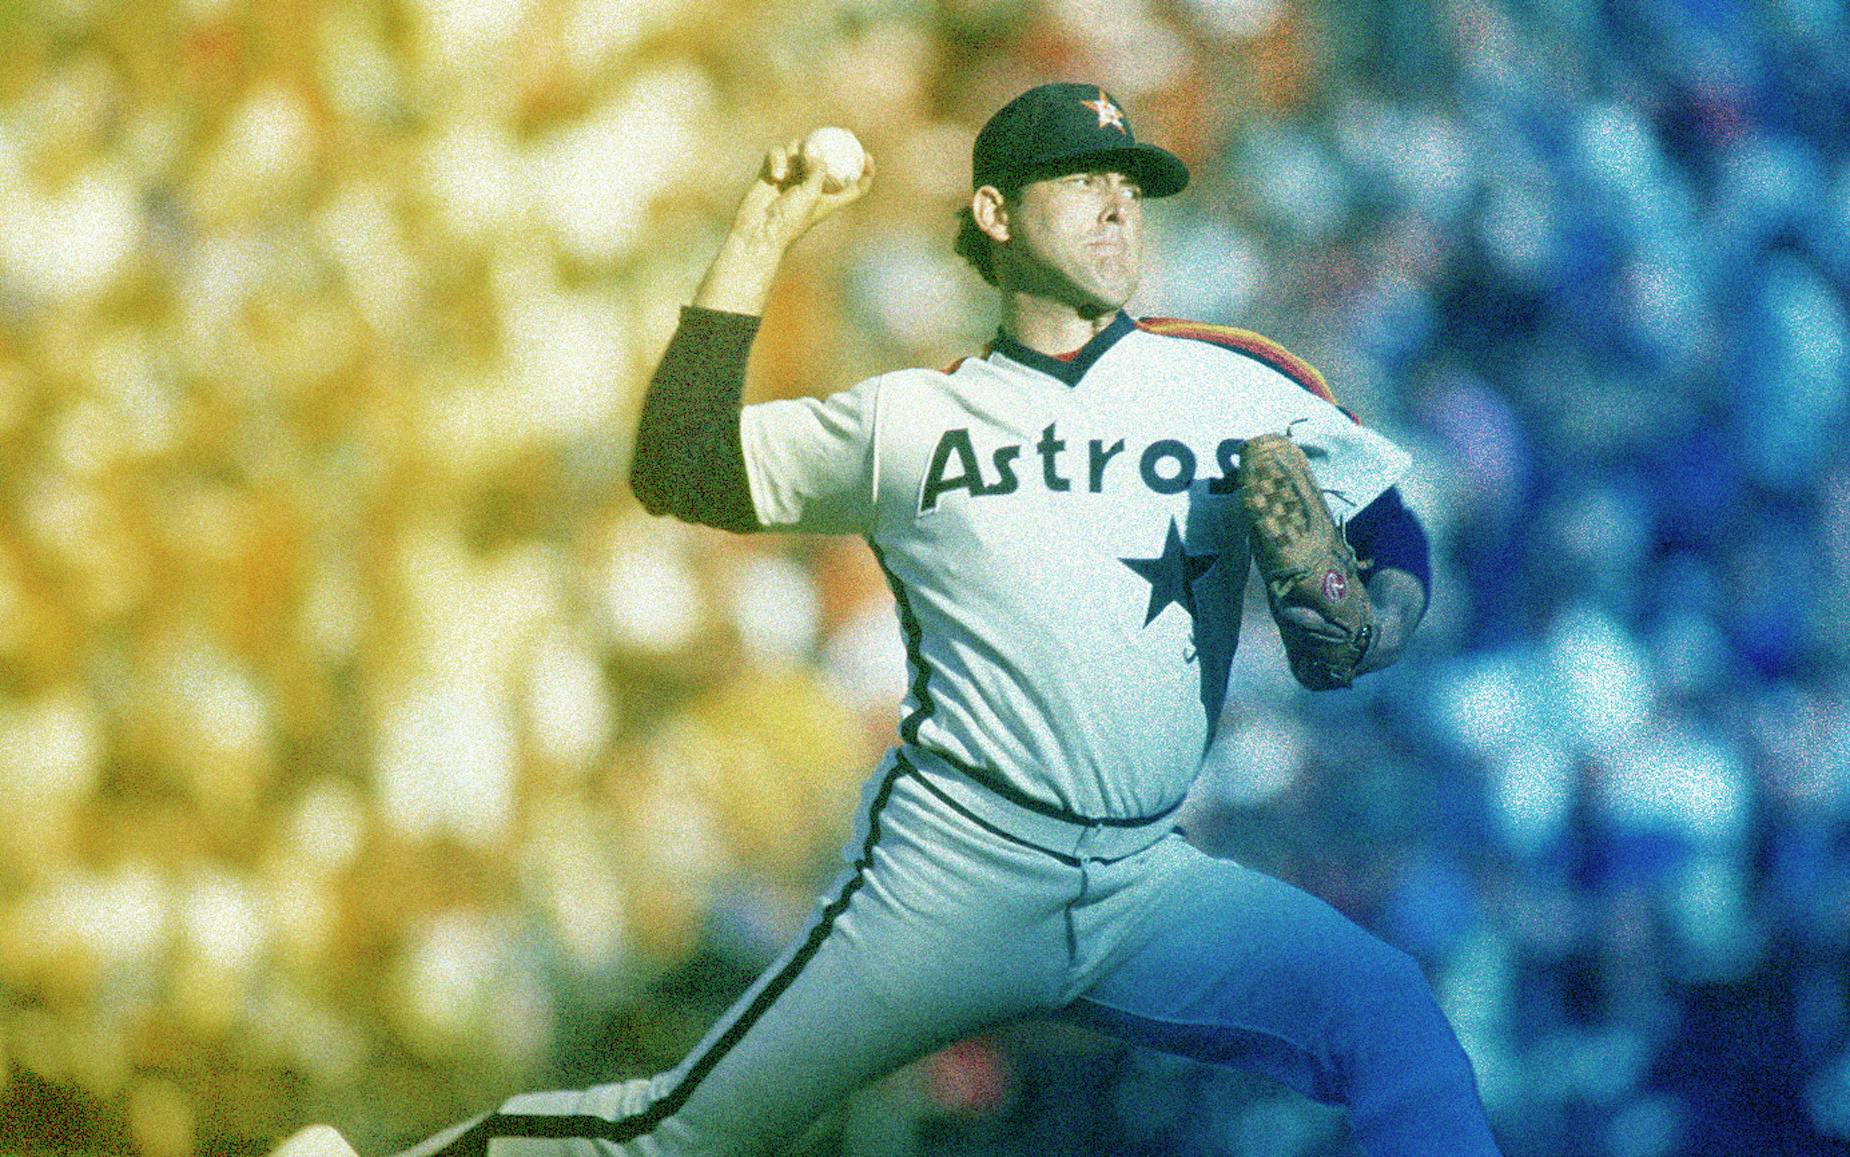 Nolan Ryan: “Why Wouldn’t an Athlete Want to Be a Positive Role Model